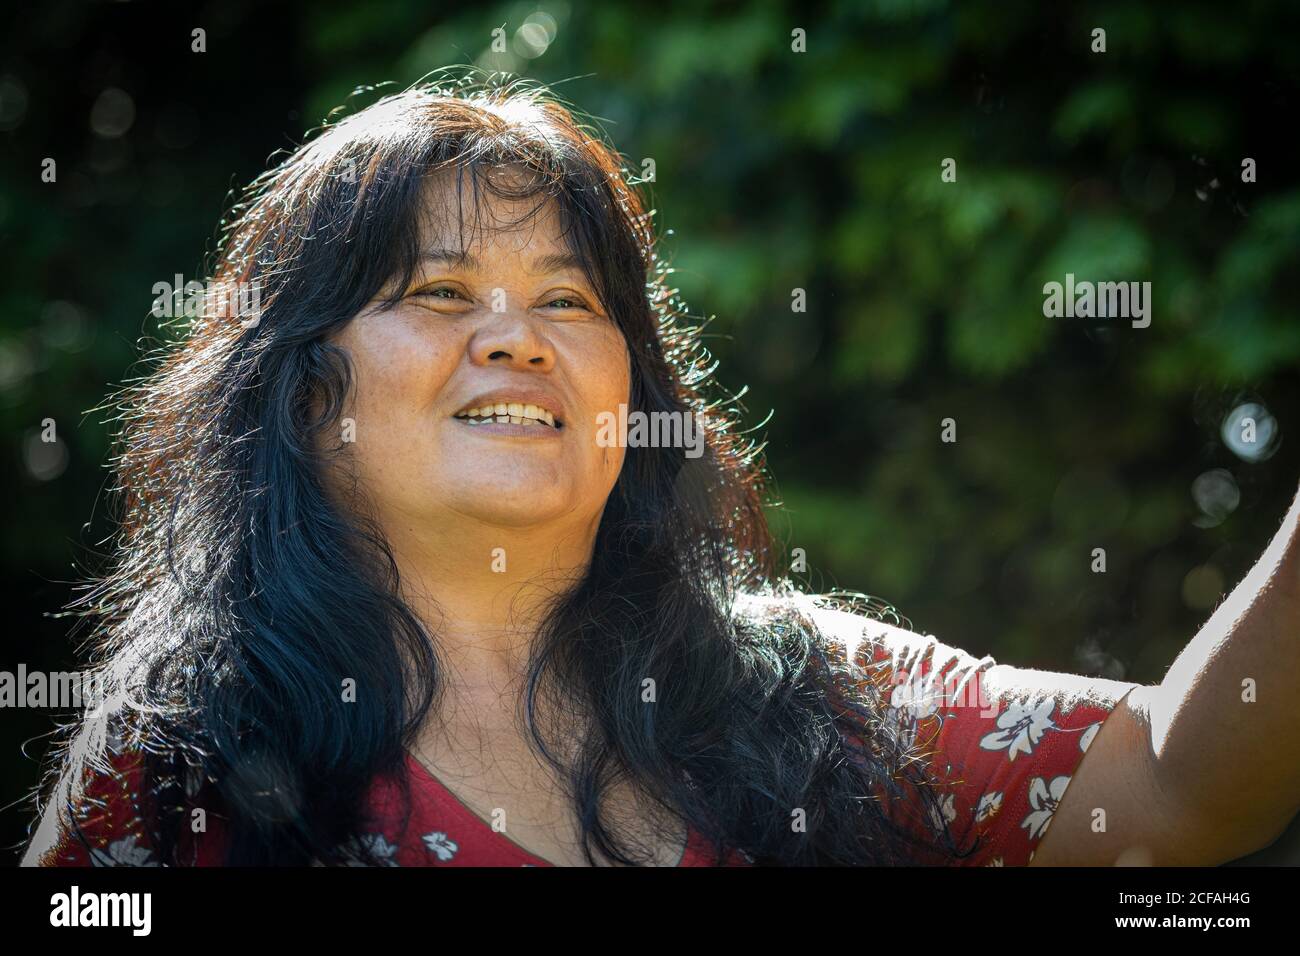 Closeup picture of a middle-aged, in her 50s, Asian woman with soap bubbles. Green leaves in the background Stock Photo